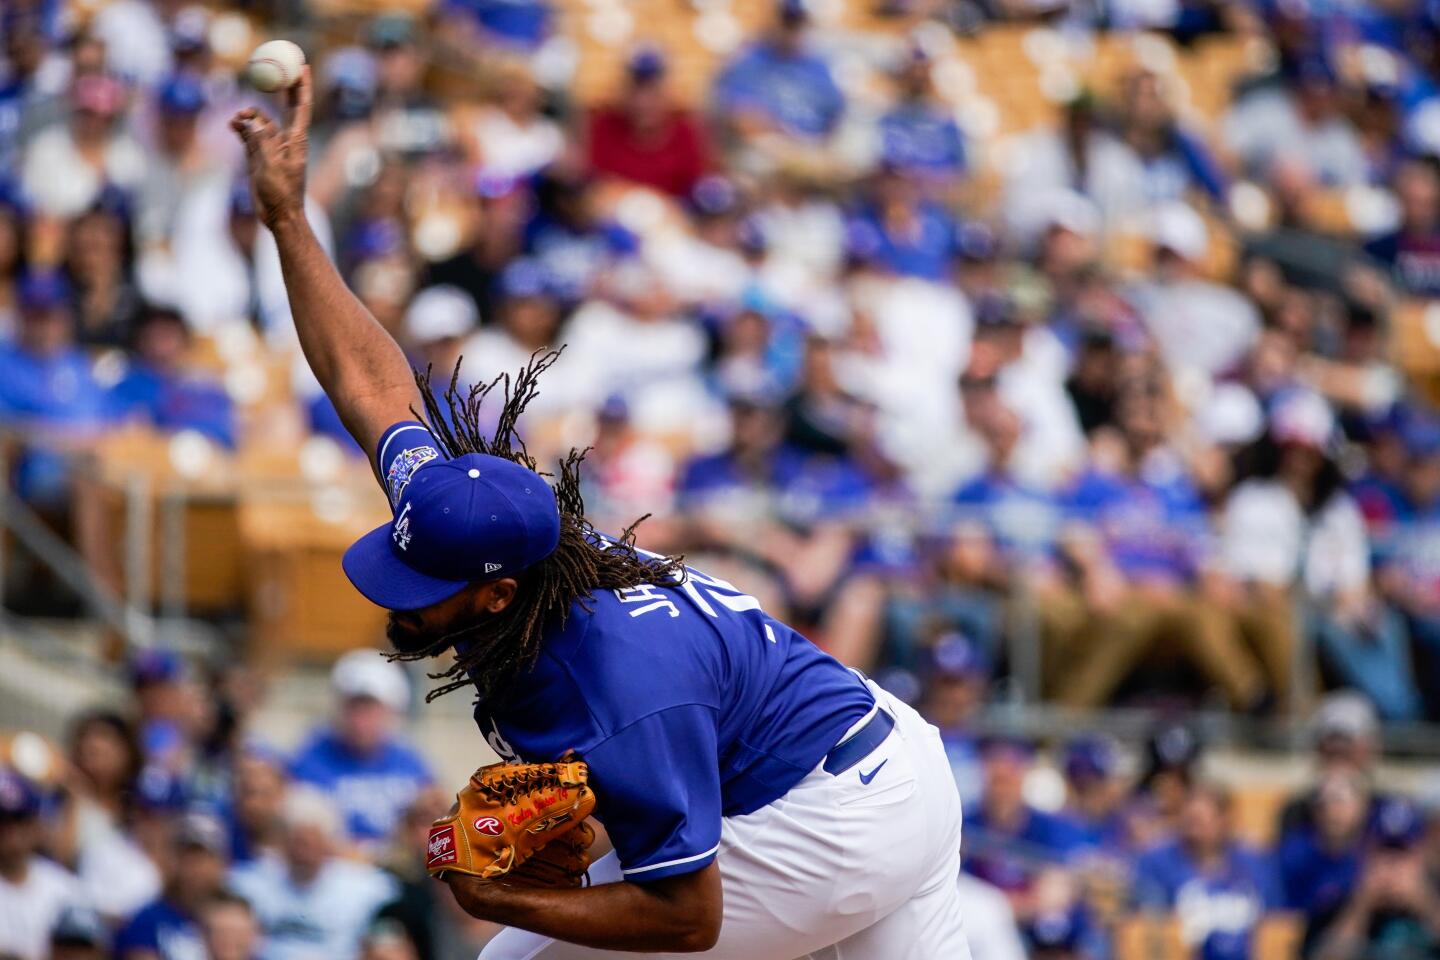 Dodgers closer Kenley Jansen delivers during a spring training exhibition game against the Chicago Cubs at Camelback Ranch on Feb. 23, 2020.